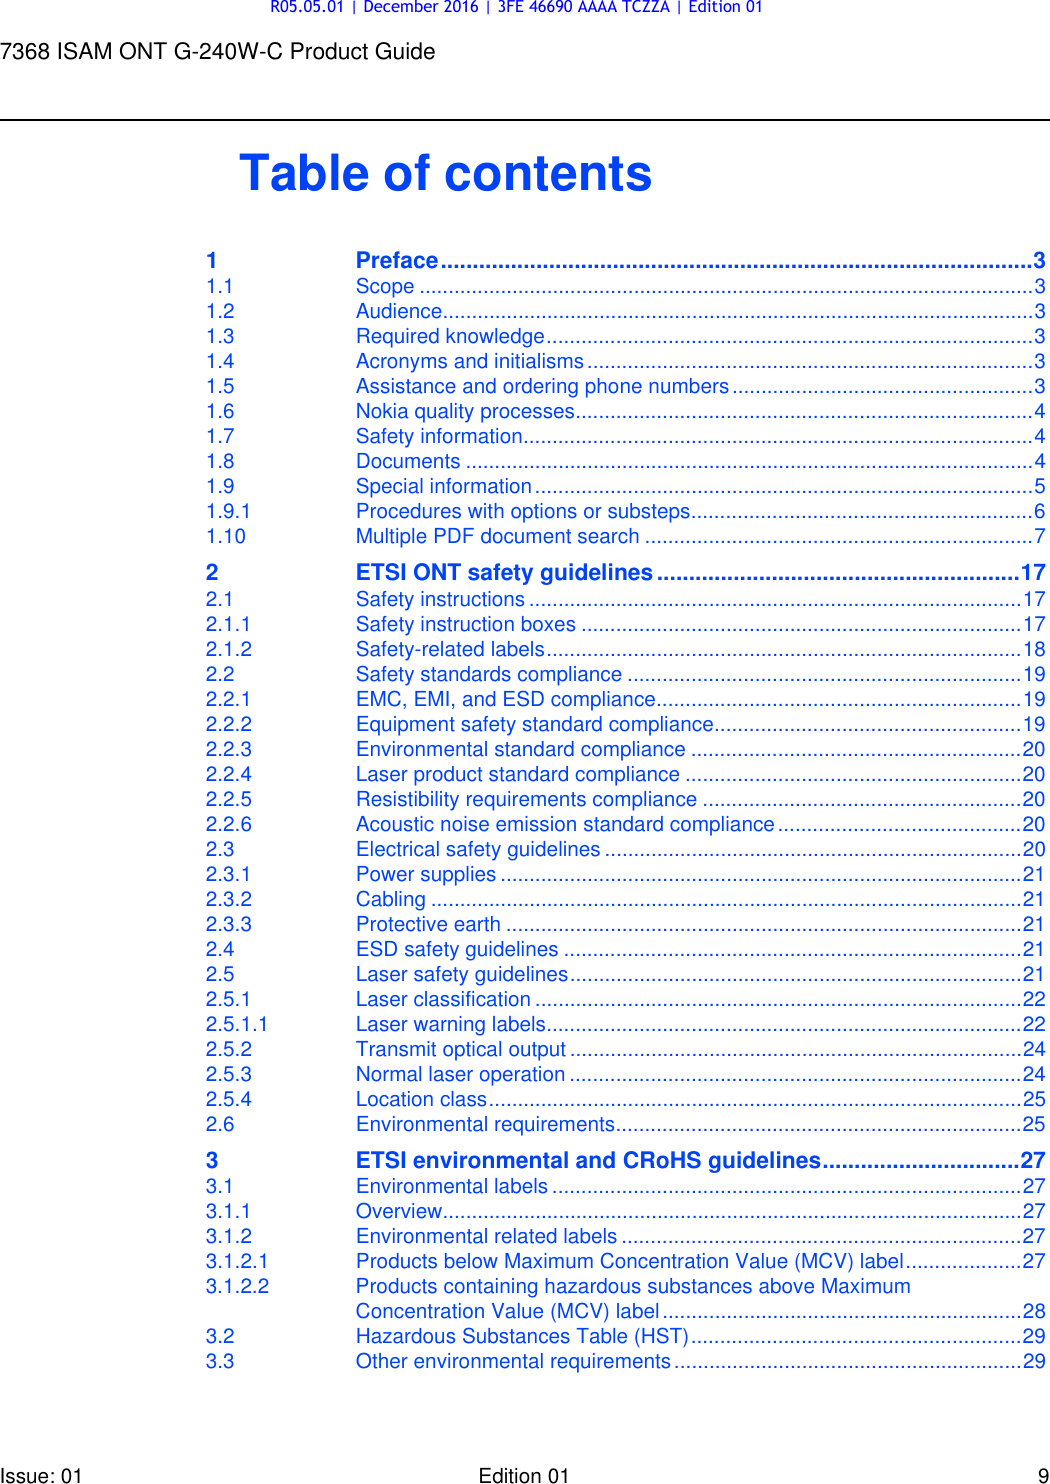 Page 9 of Nokia Bell G240W-C GPON ONU User Manual 7368 ISAM ONT G 240W B Product Guide